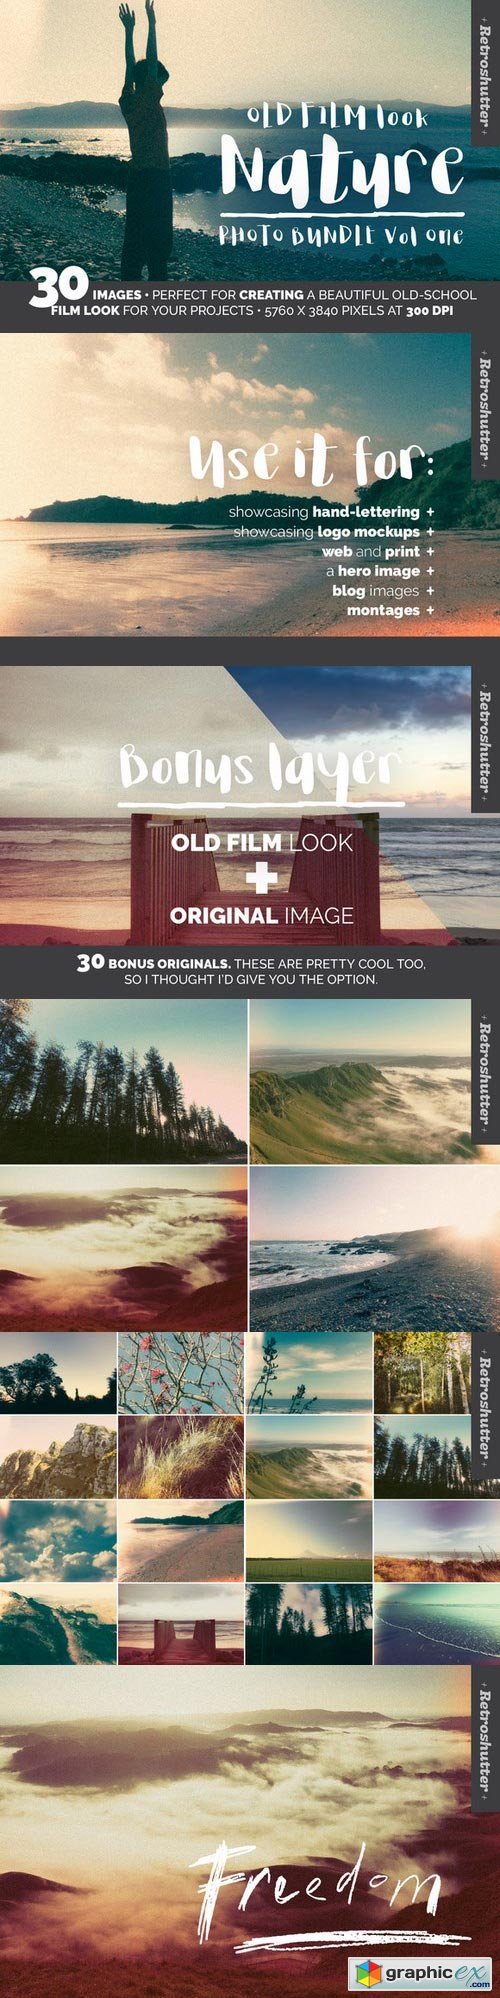 Old Film-Look Nature Images Vol One